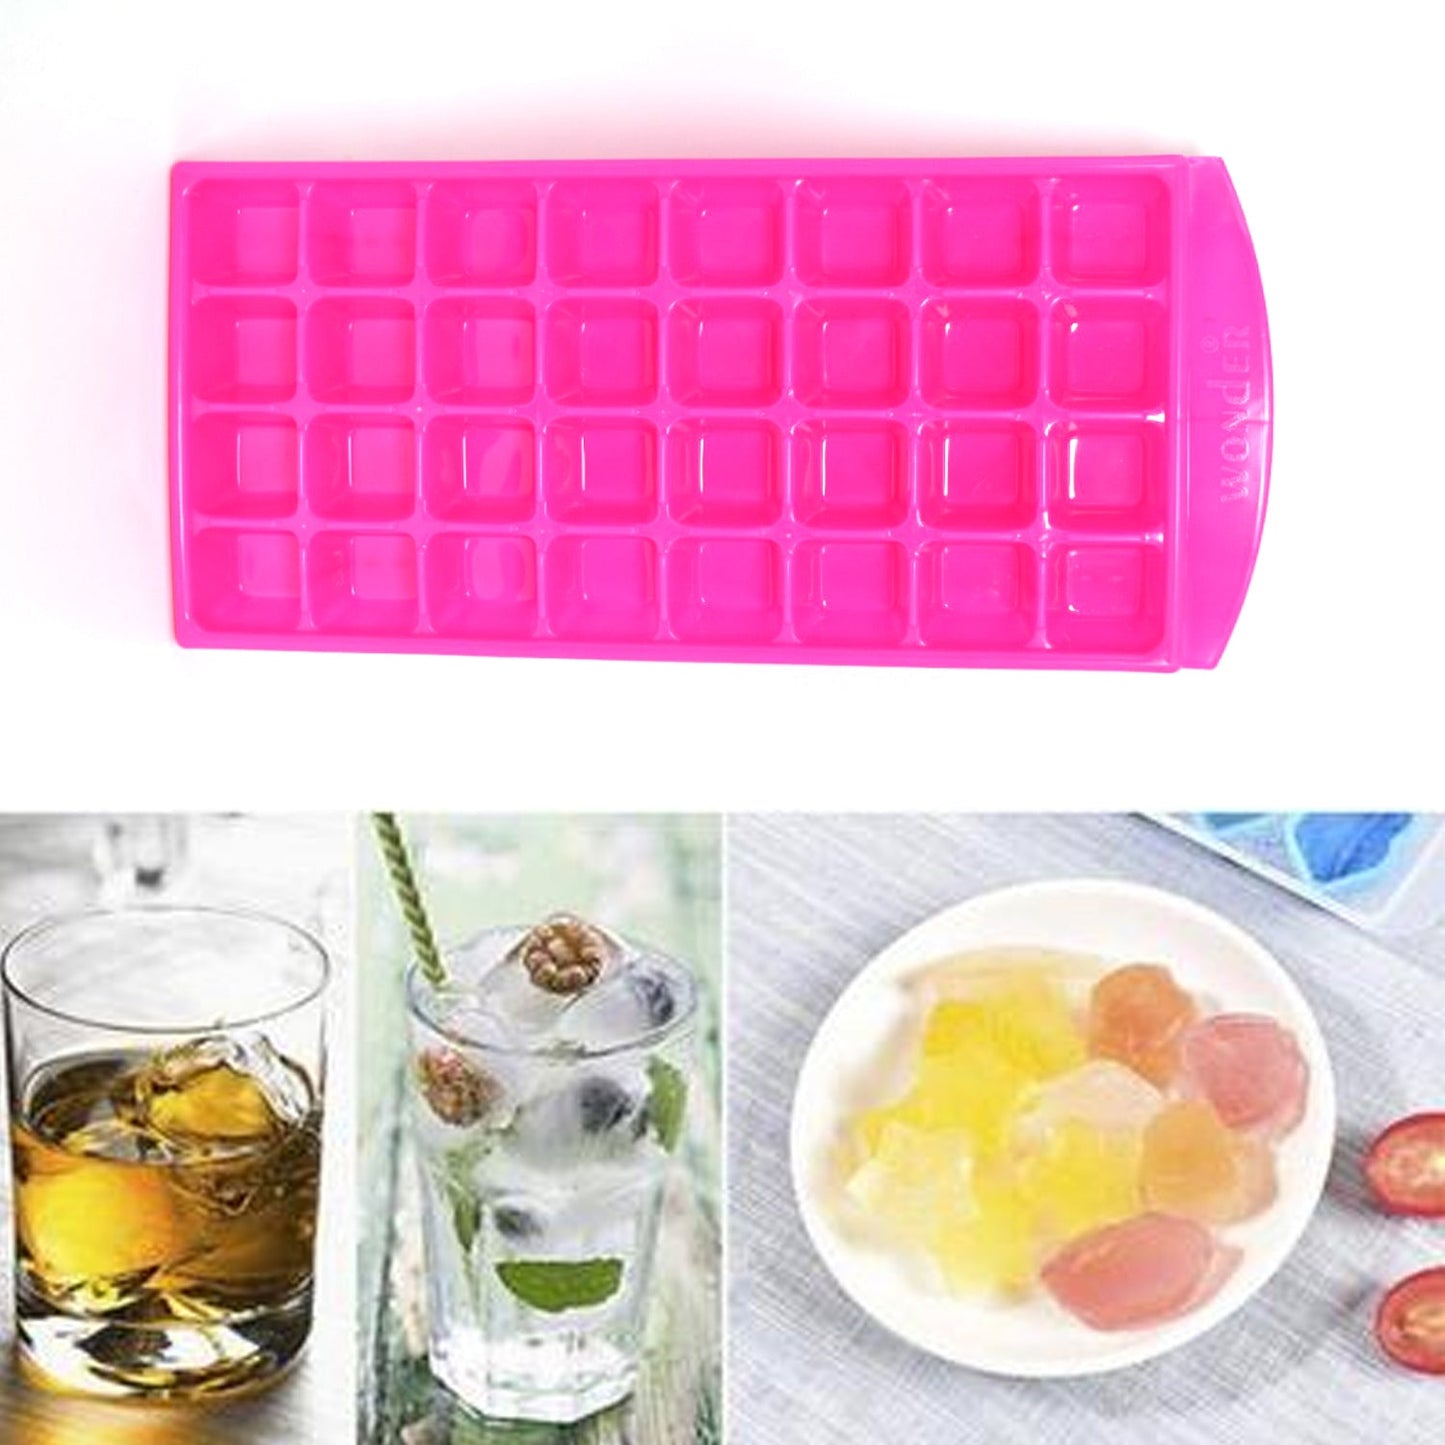 2795 32 Cavity Ice Tray For Making And Creating Ice Cubes Easily. - SWASTIK CREATIONS The Trend Point SWASTIK CREATIONS The Trend Point